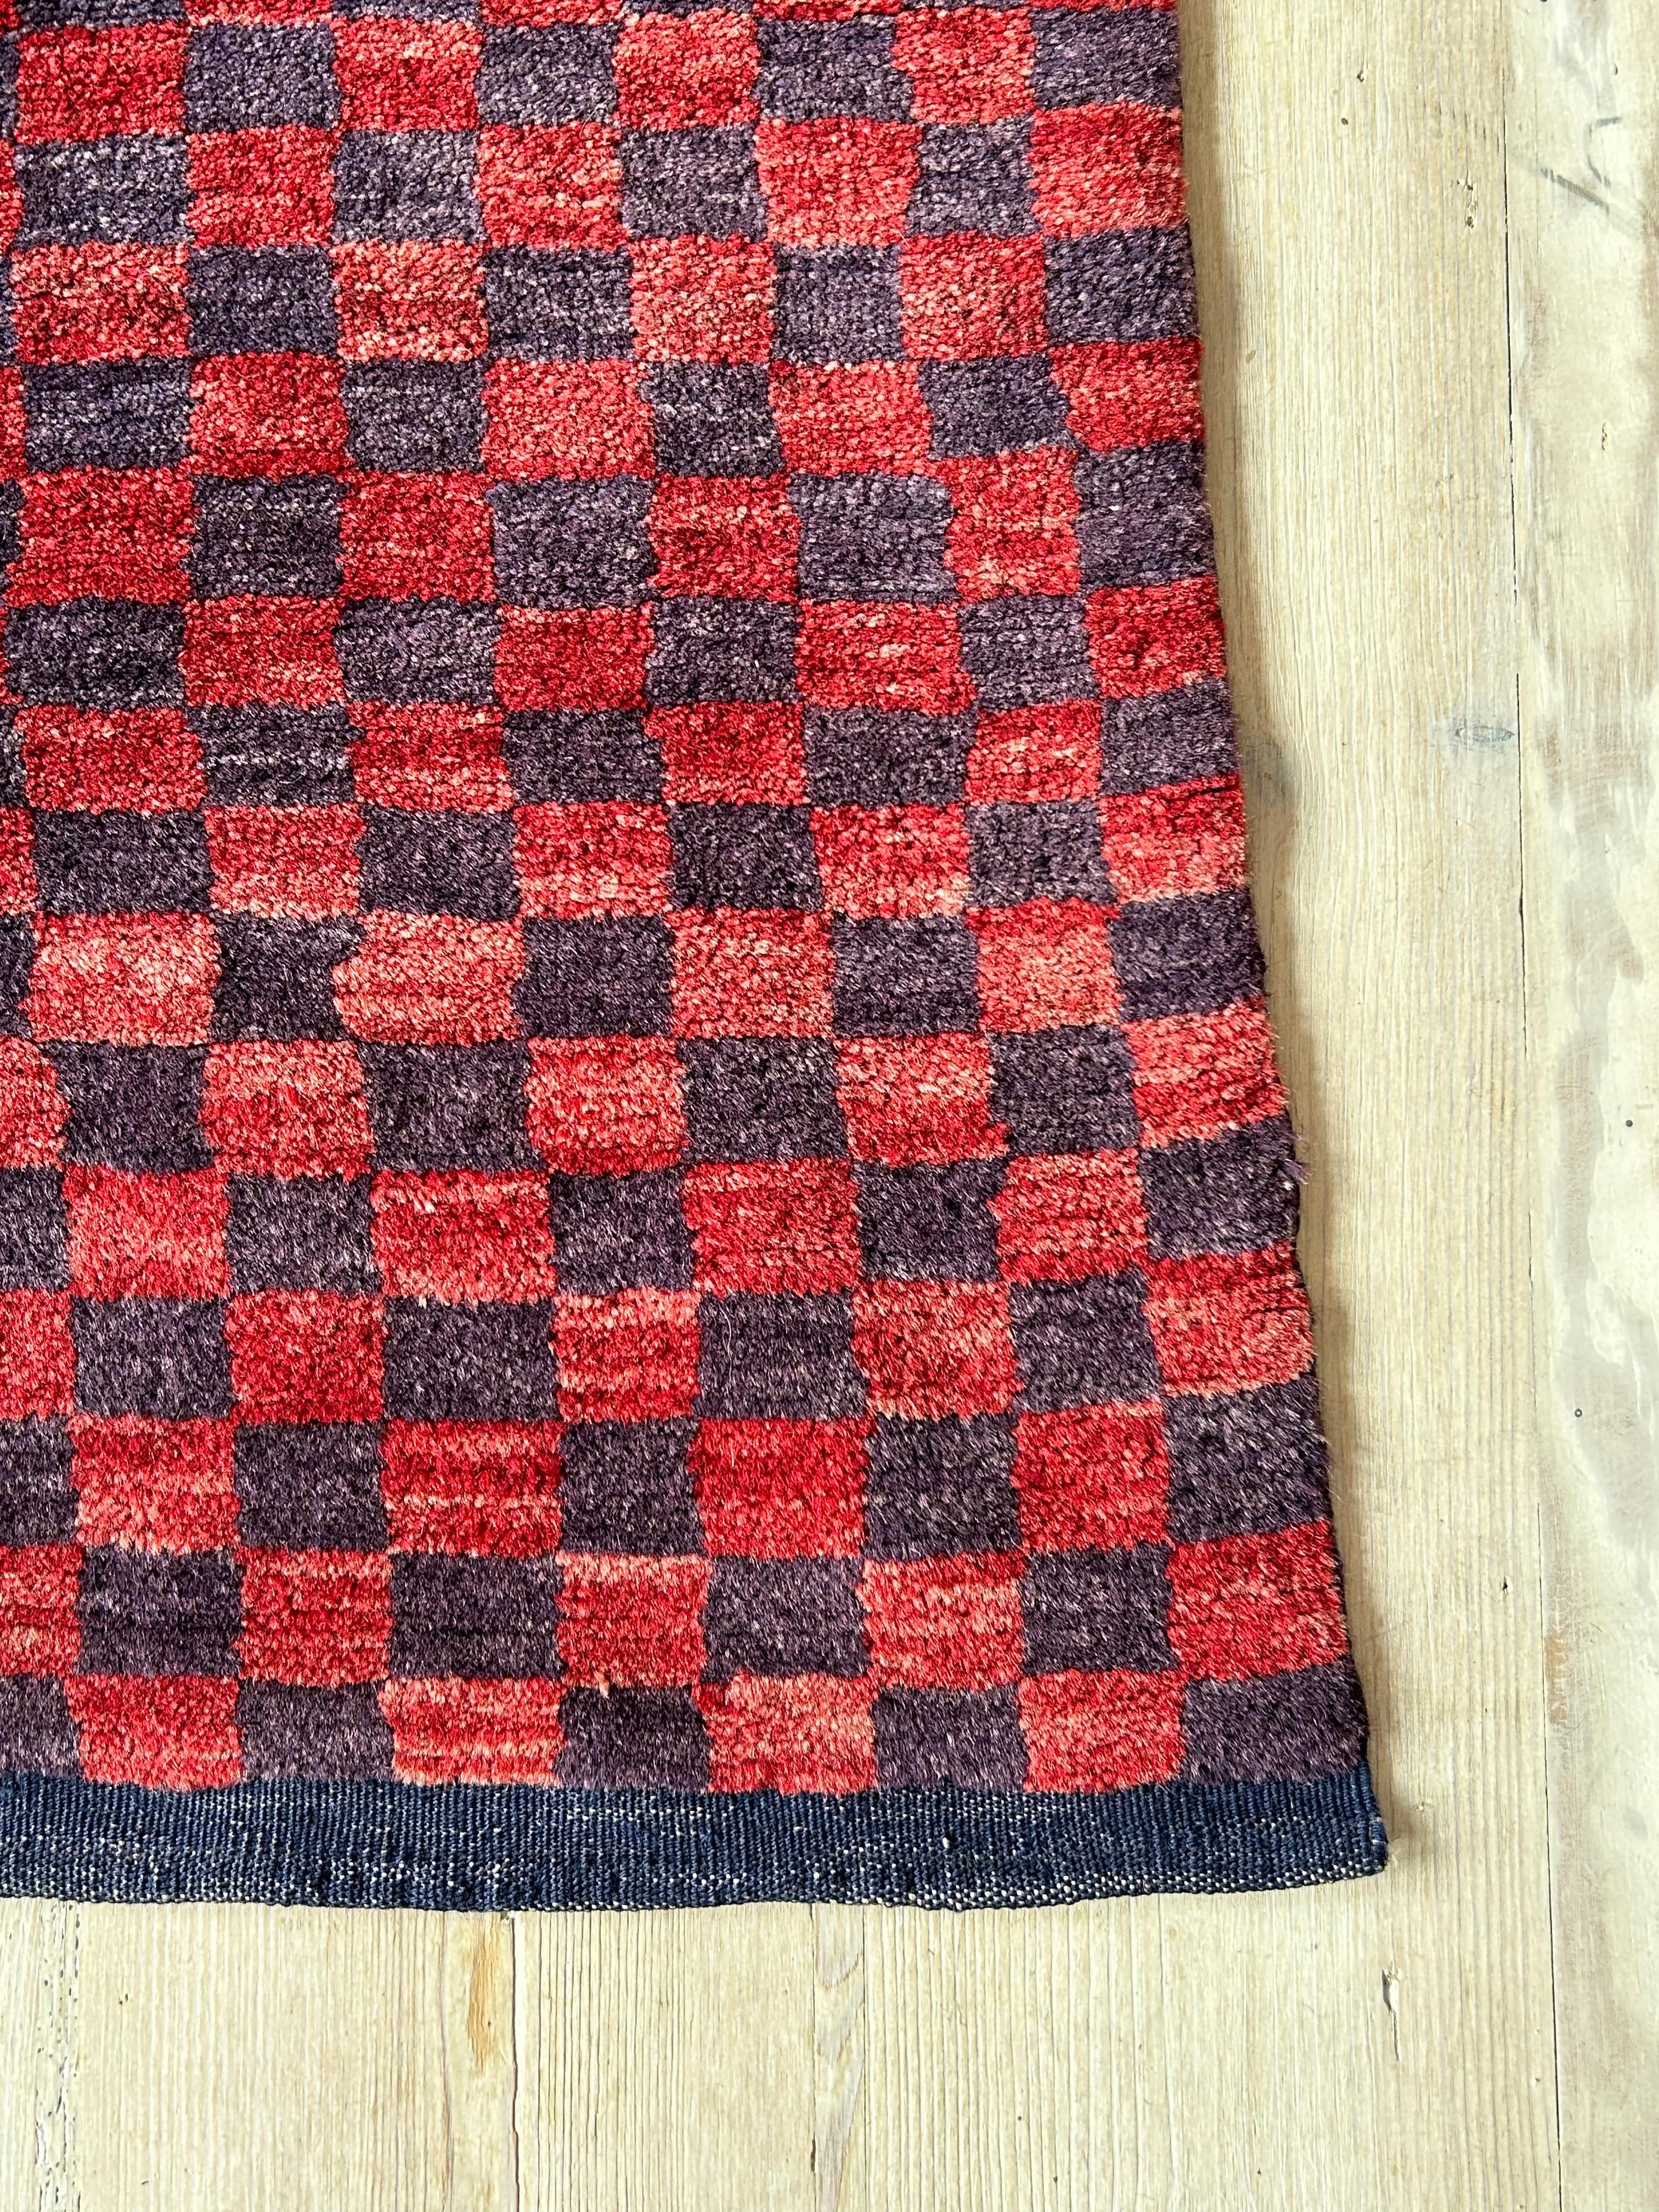 Vintage Tulu Rug with Red and Purple Check Pattern, Turkey, 20th Century For Sale 1